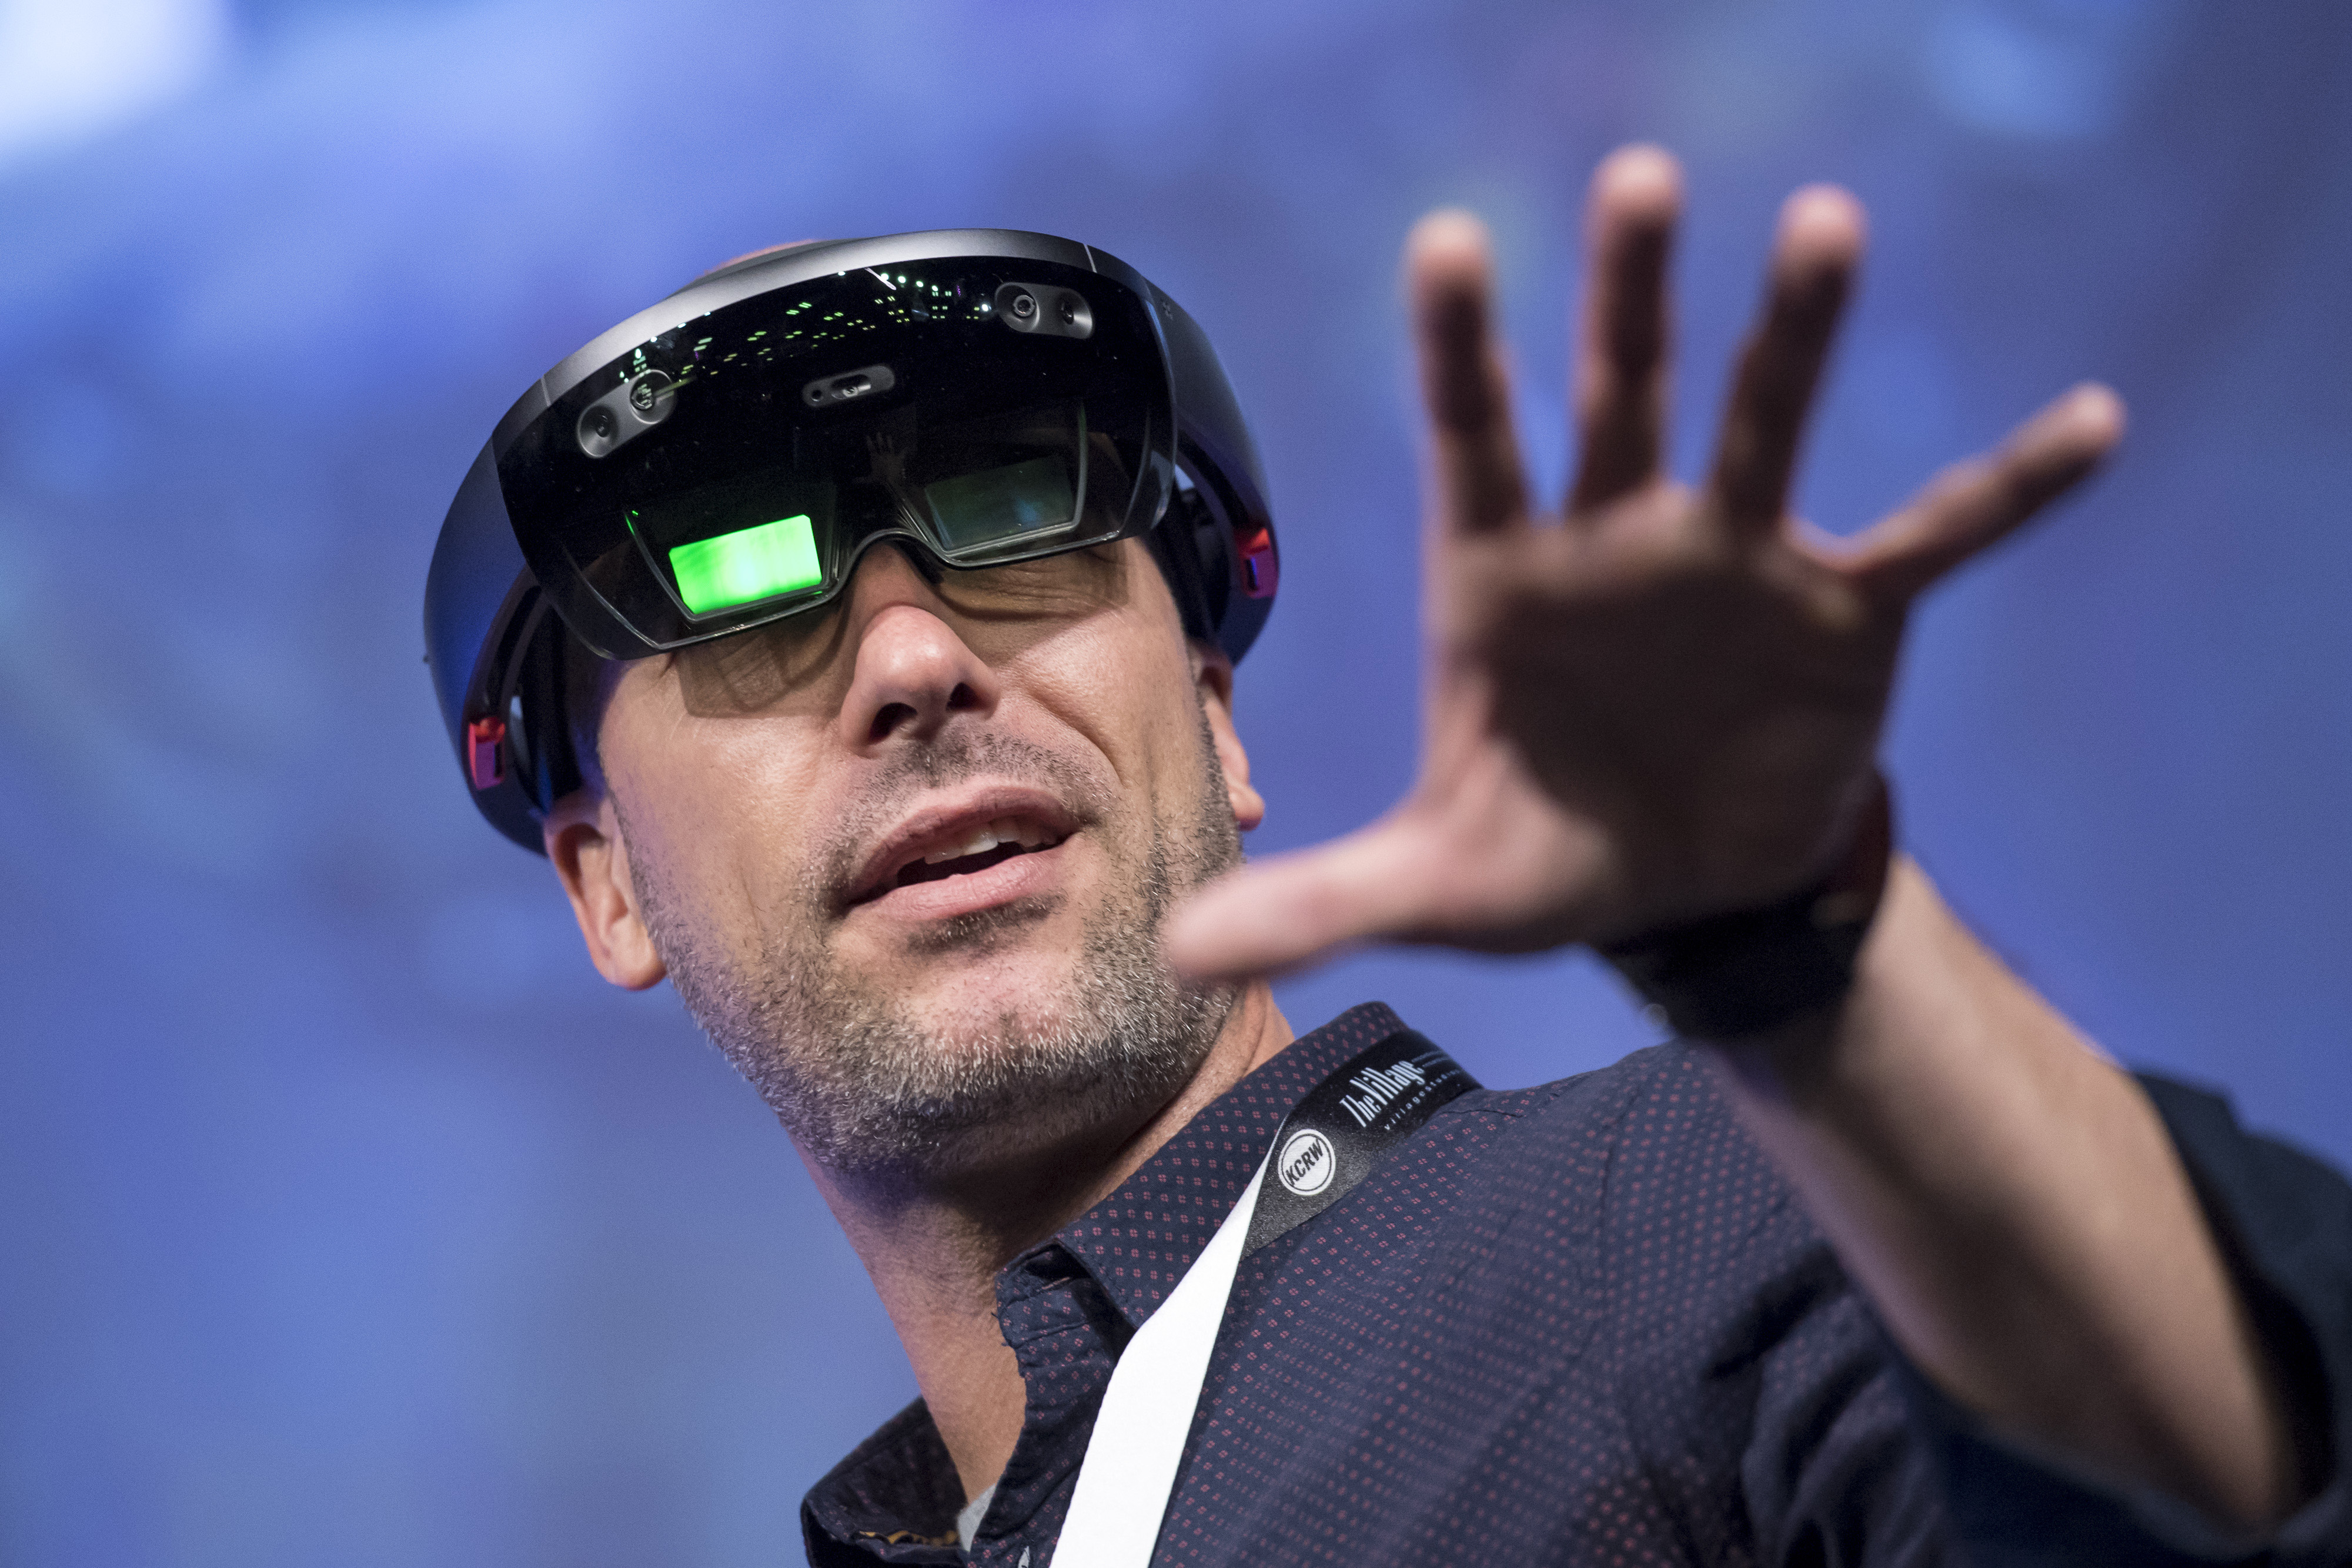 Facundo Diaz, co-founder and chief executive officer of Vrtify Inc., wears a pair of Microsoft Corp, HoloLens glasses as he speaks at the 2017 South By Southwest (SXSW) Interactive Festival at the Austin Convention Center in Austin, Texas, U.S., on Tuesday, March 14, 2017. The SXSW Interactive Festival features a variety of tracks that allow attendees to explore what's next in the worlds of entertainment, culture, and technology. Photographer: David Paul Morris/Bloomberg via Getty Images (Bloomberg&mdash;Bloomberg via Getty Images)